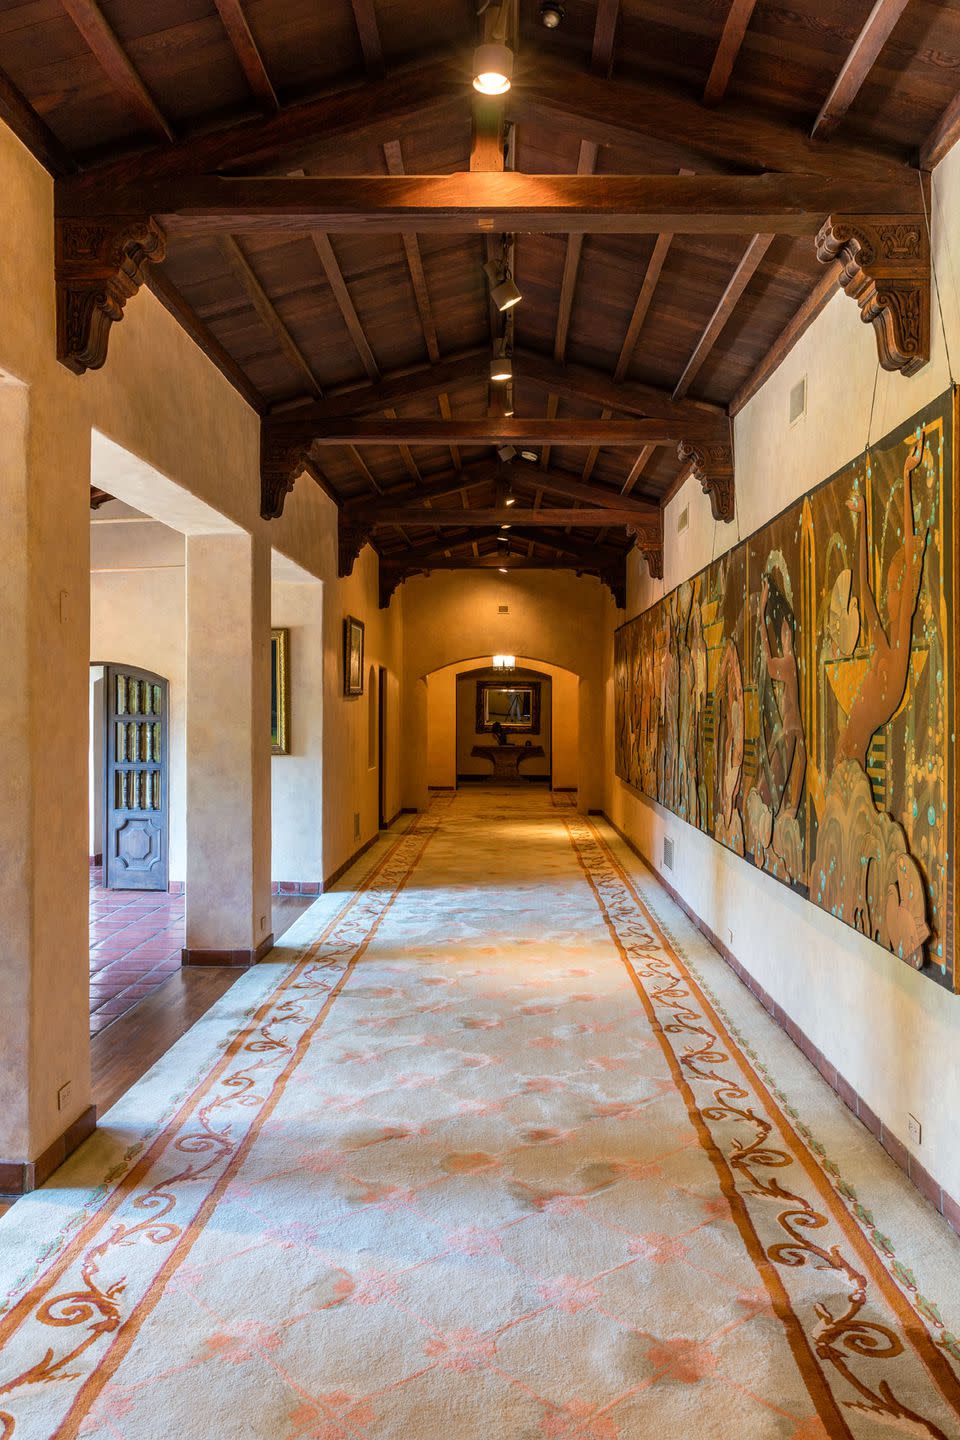 8) The grand upstairs hallway is more than 102 feet long and features a 40-foot wide, nearly 9-foot-tall Dennis Abbe mural that was commissioned by Hugh Hefner.